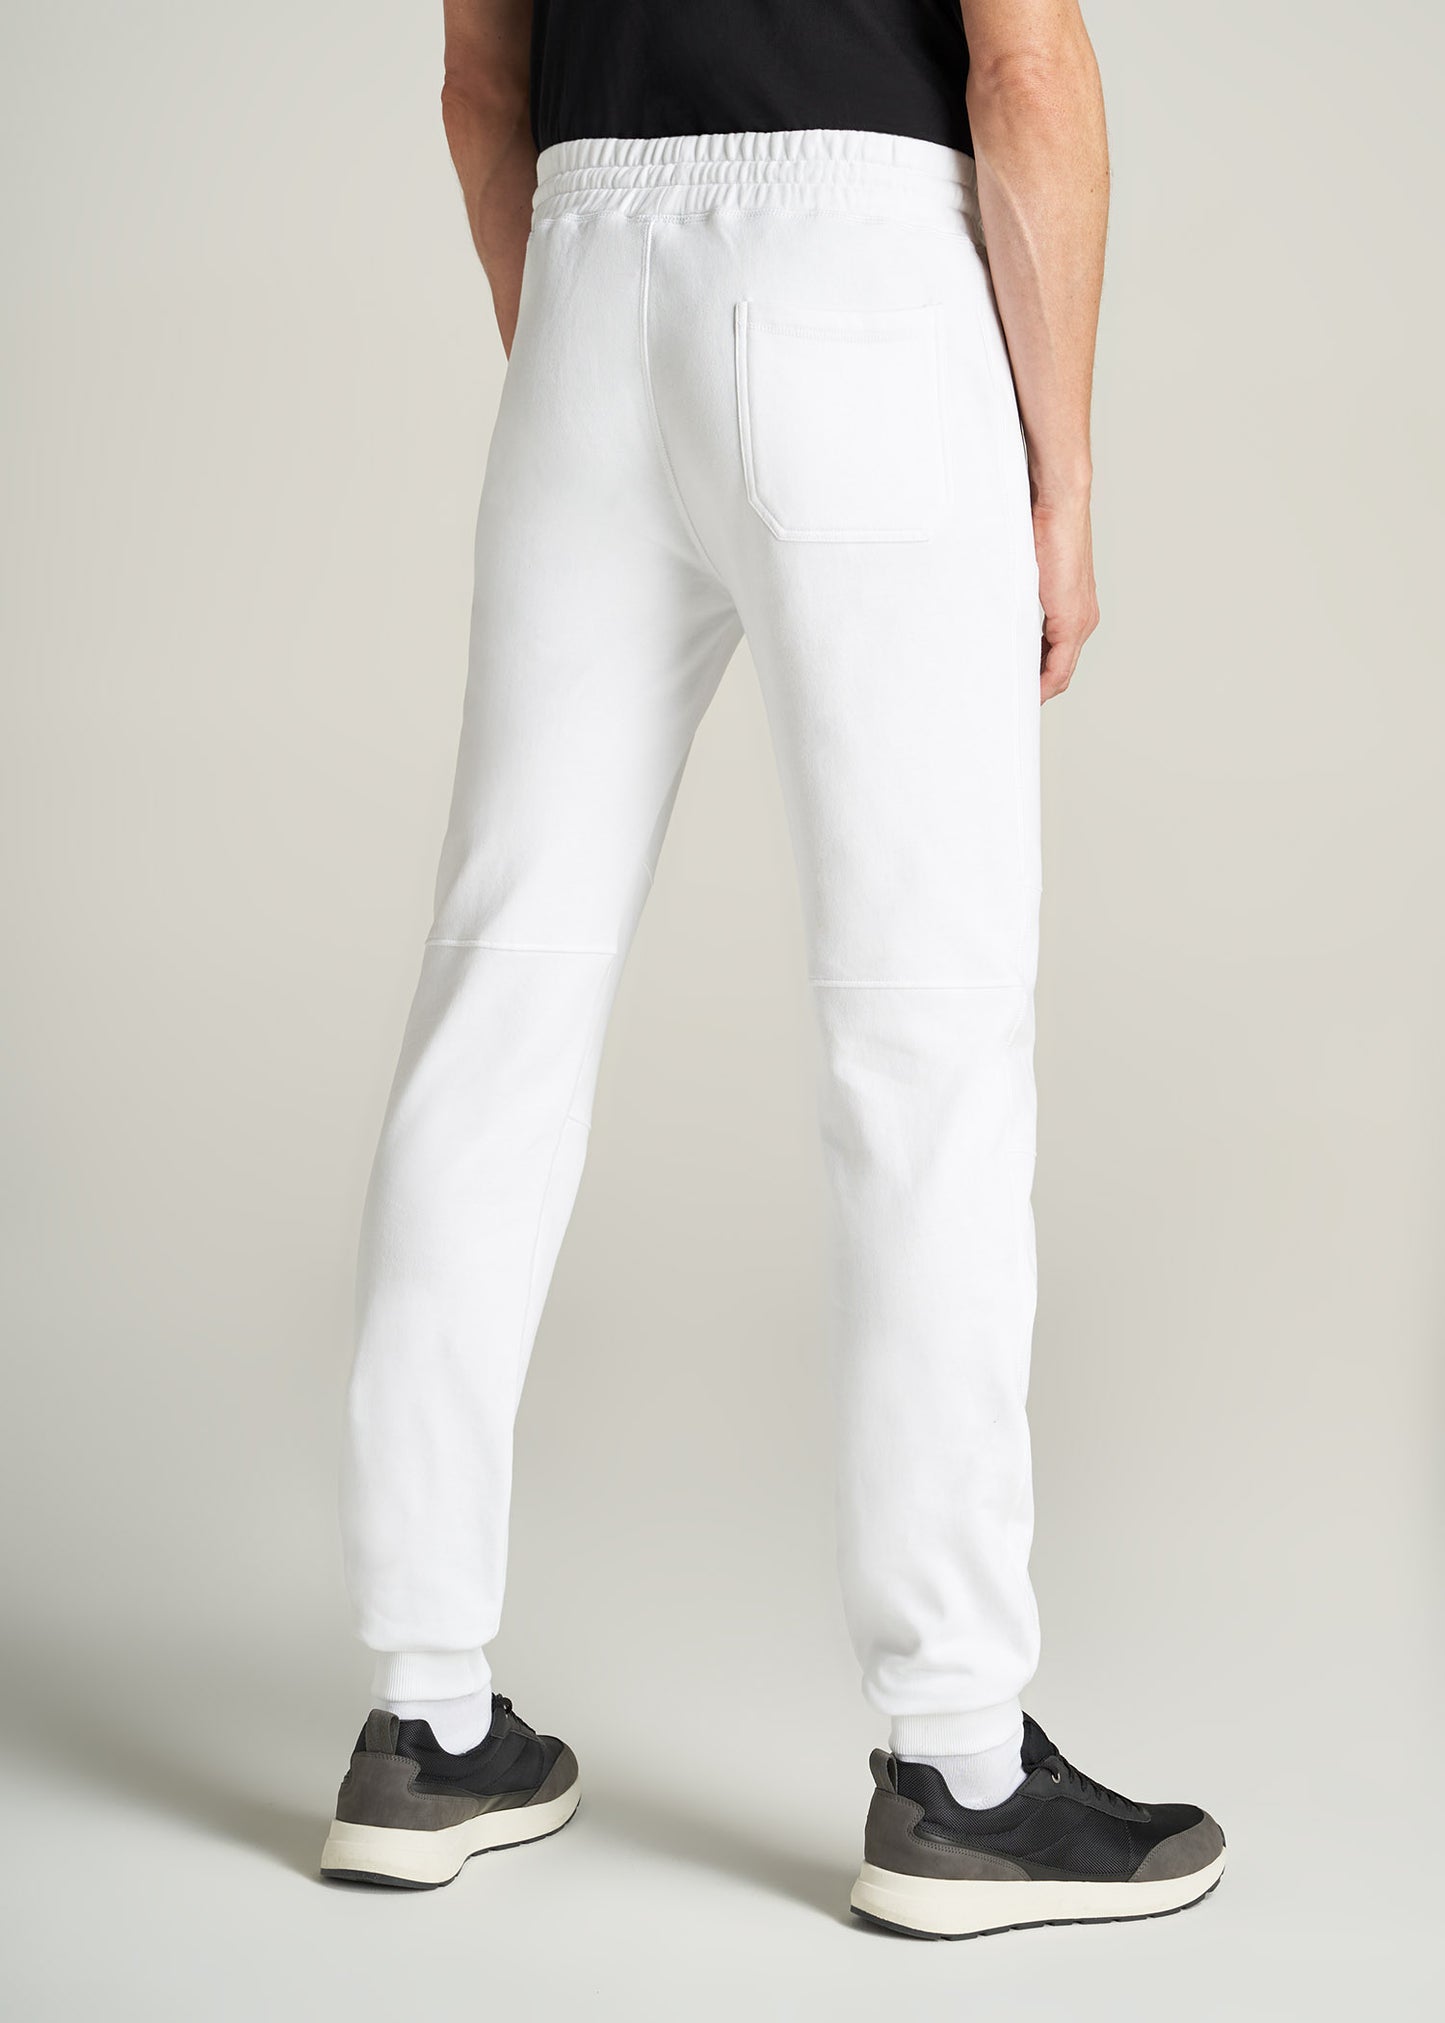    American-Tall-Men-FrenchTerry-Jogger-BrightWhite-back